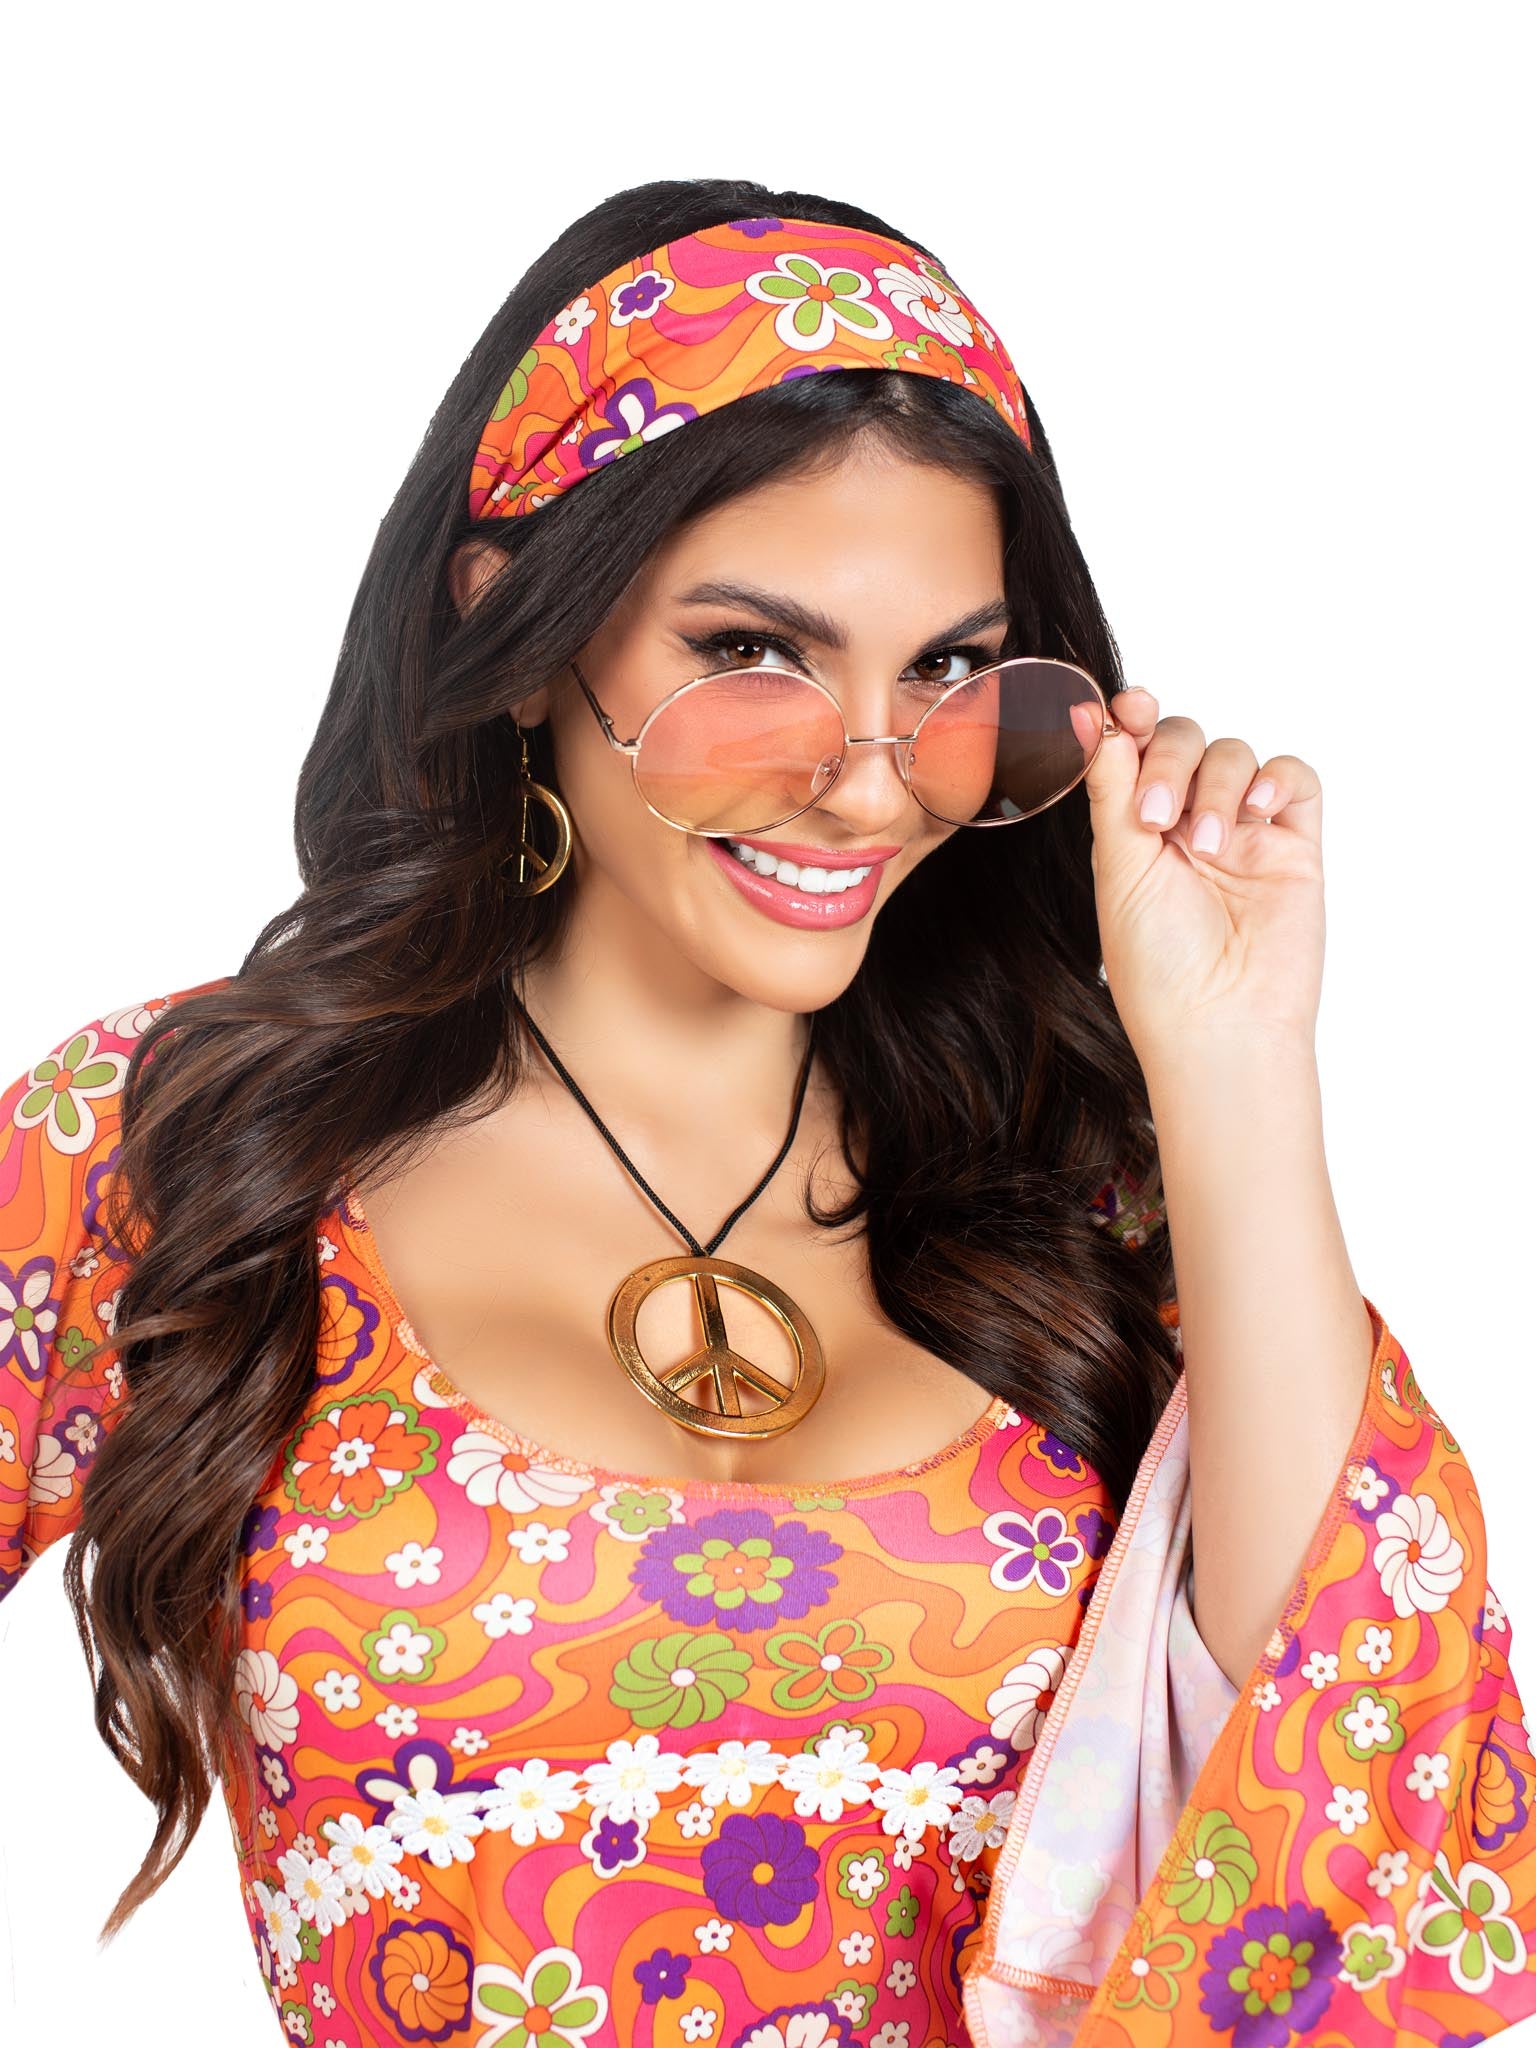 Hippie Chick Costume - Adult